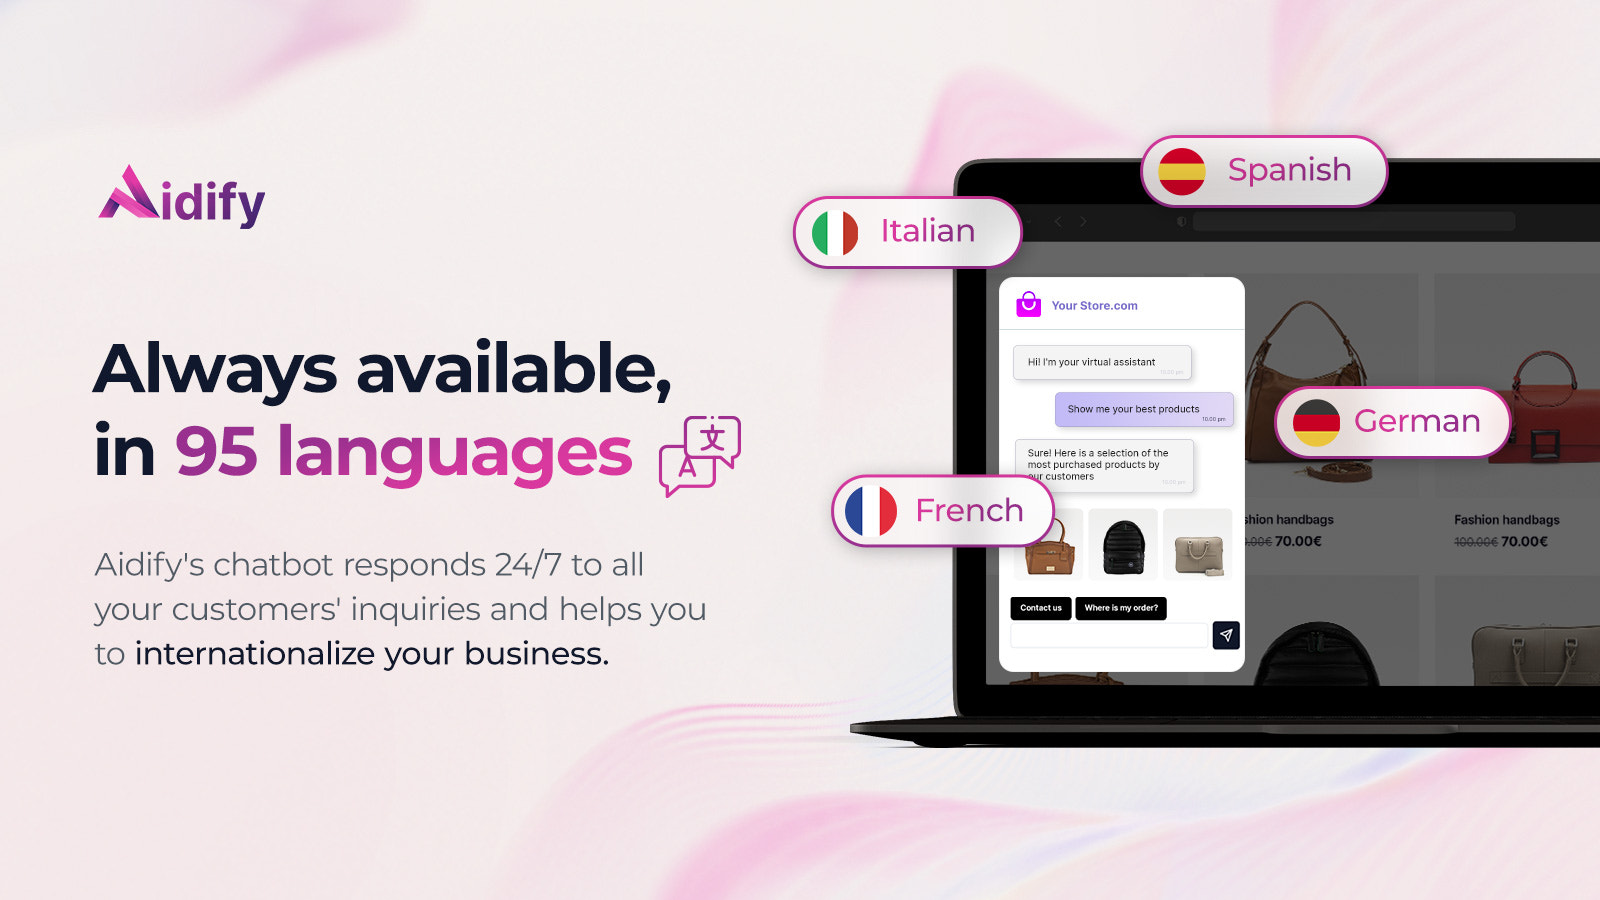 Available 24/7, replys in 95 languages